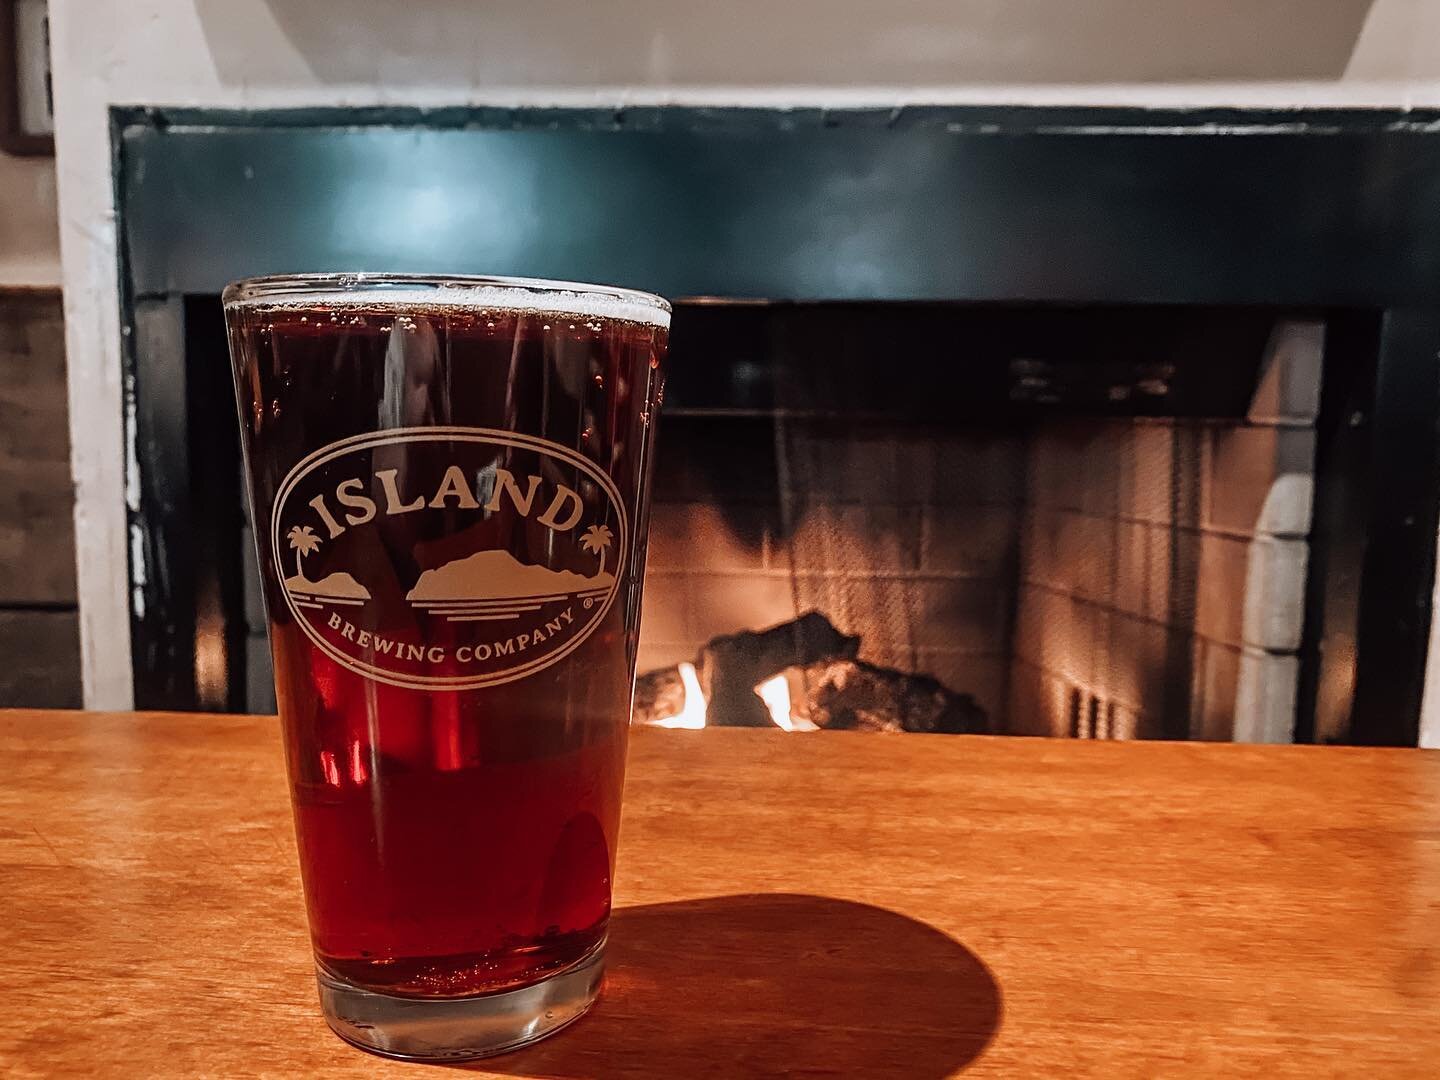 Kick off your weekend with a cold Scotch Ale. Featuring the Jubilee from @islandbrewingcompany